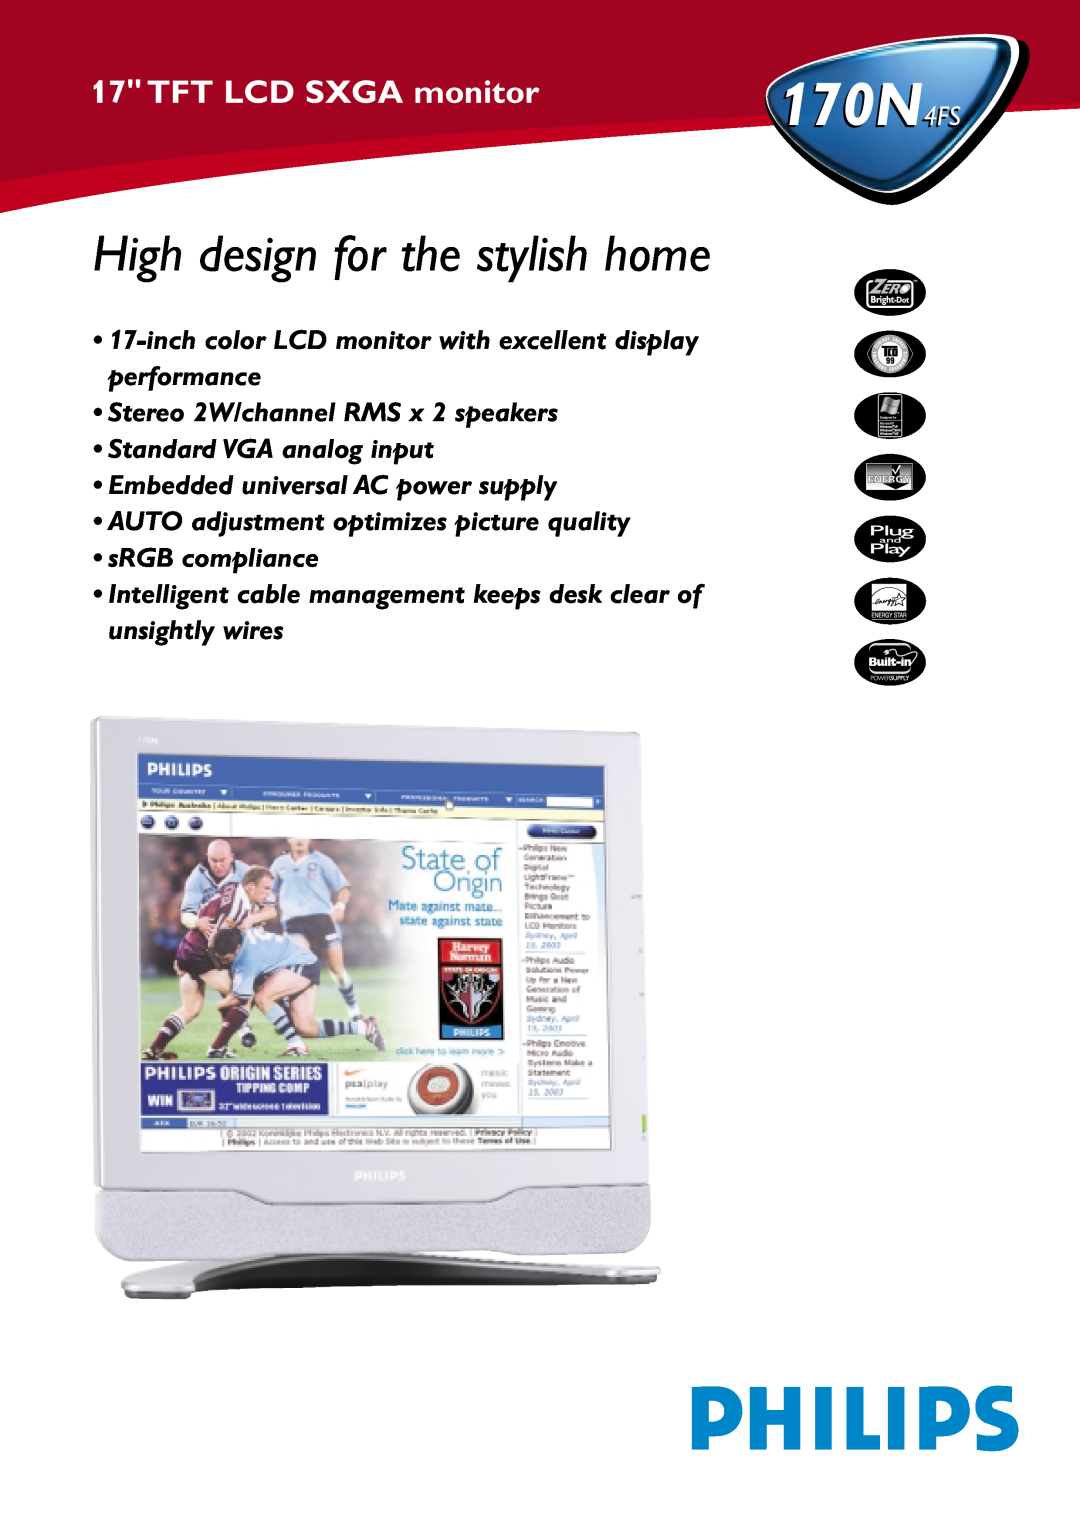 Philips 170N4FS manual High design for the stylish home, TFT LCD SXGA monitor, Stereo 2W/channel RMS x 2 speakers 